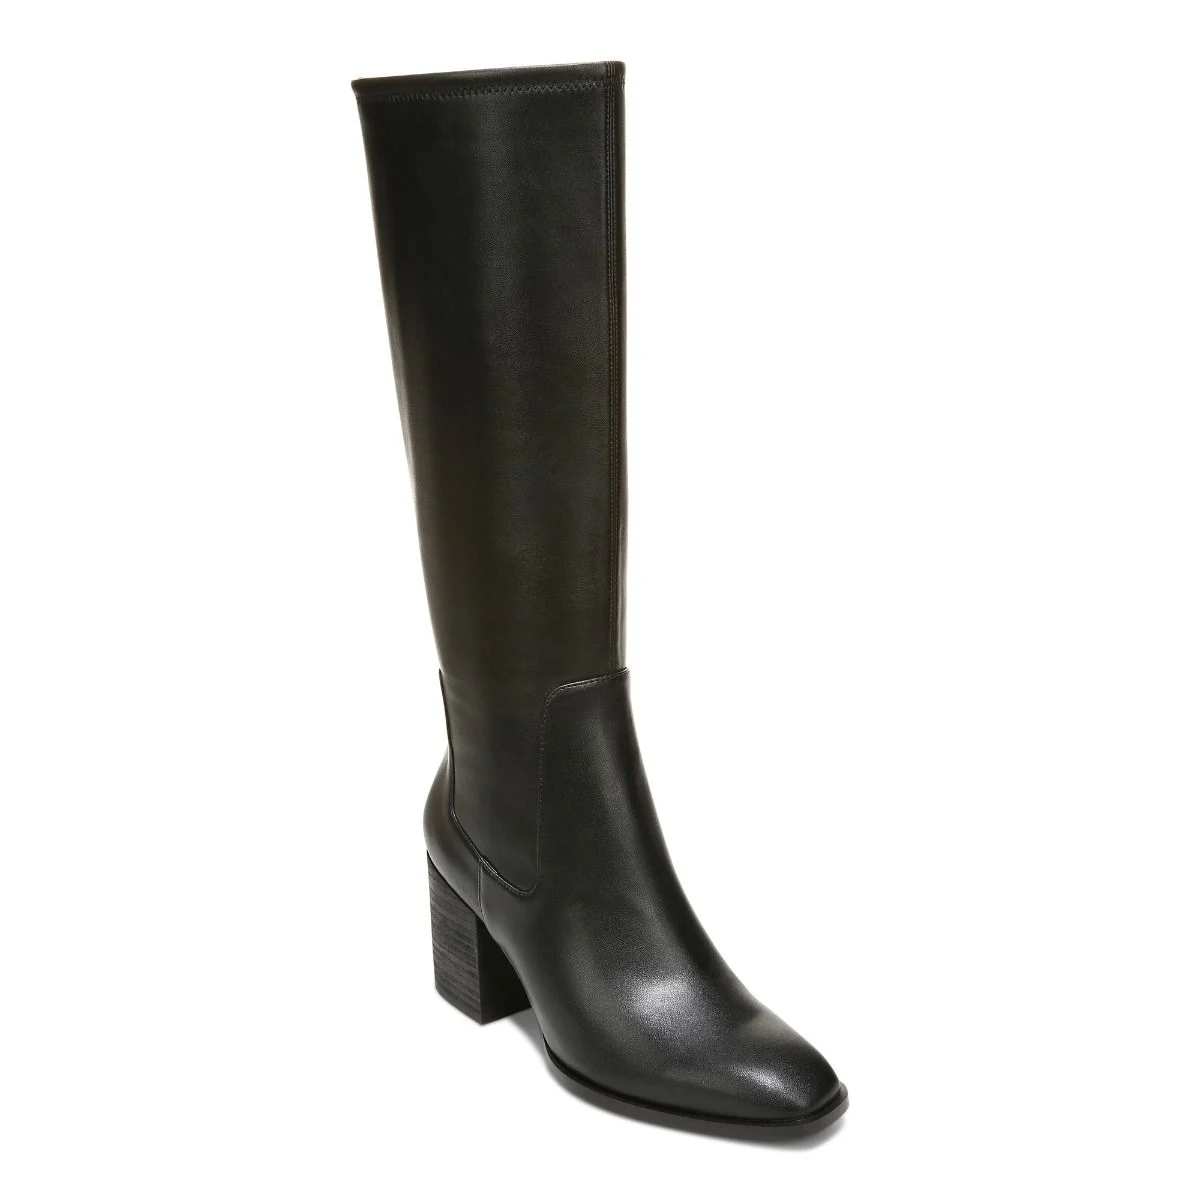 Vionic Shoes + Inessa Tall Boot